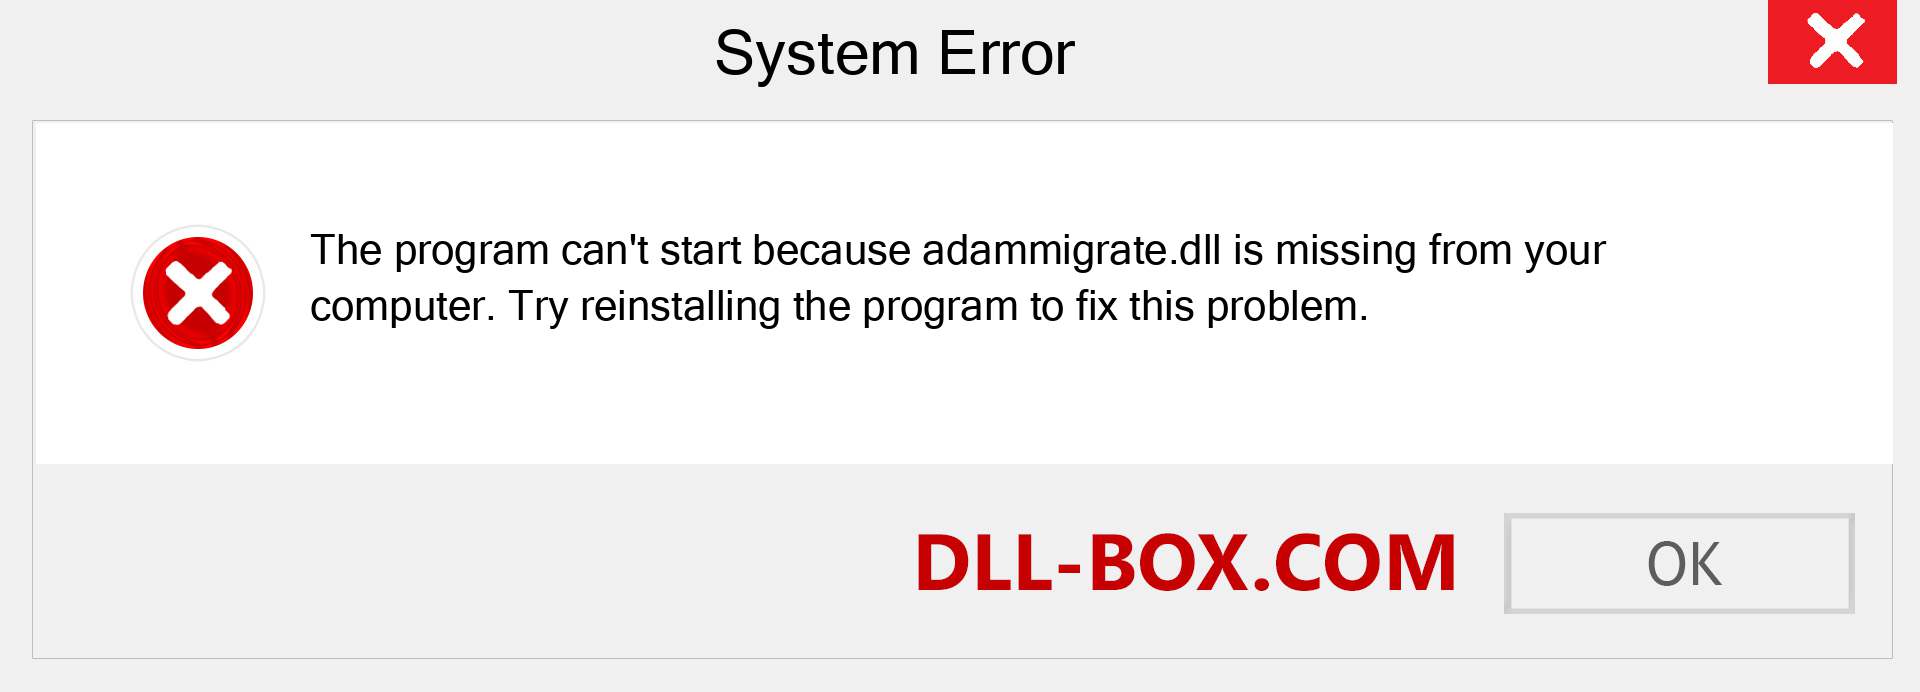  adammigrate.dll file is missing?. Download for Windows 7, 8, 10 - Fix  adammigrate dll Missing Error on Windows, photos, images